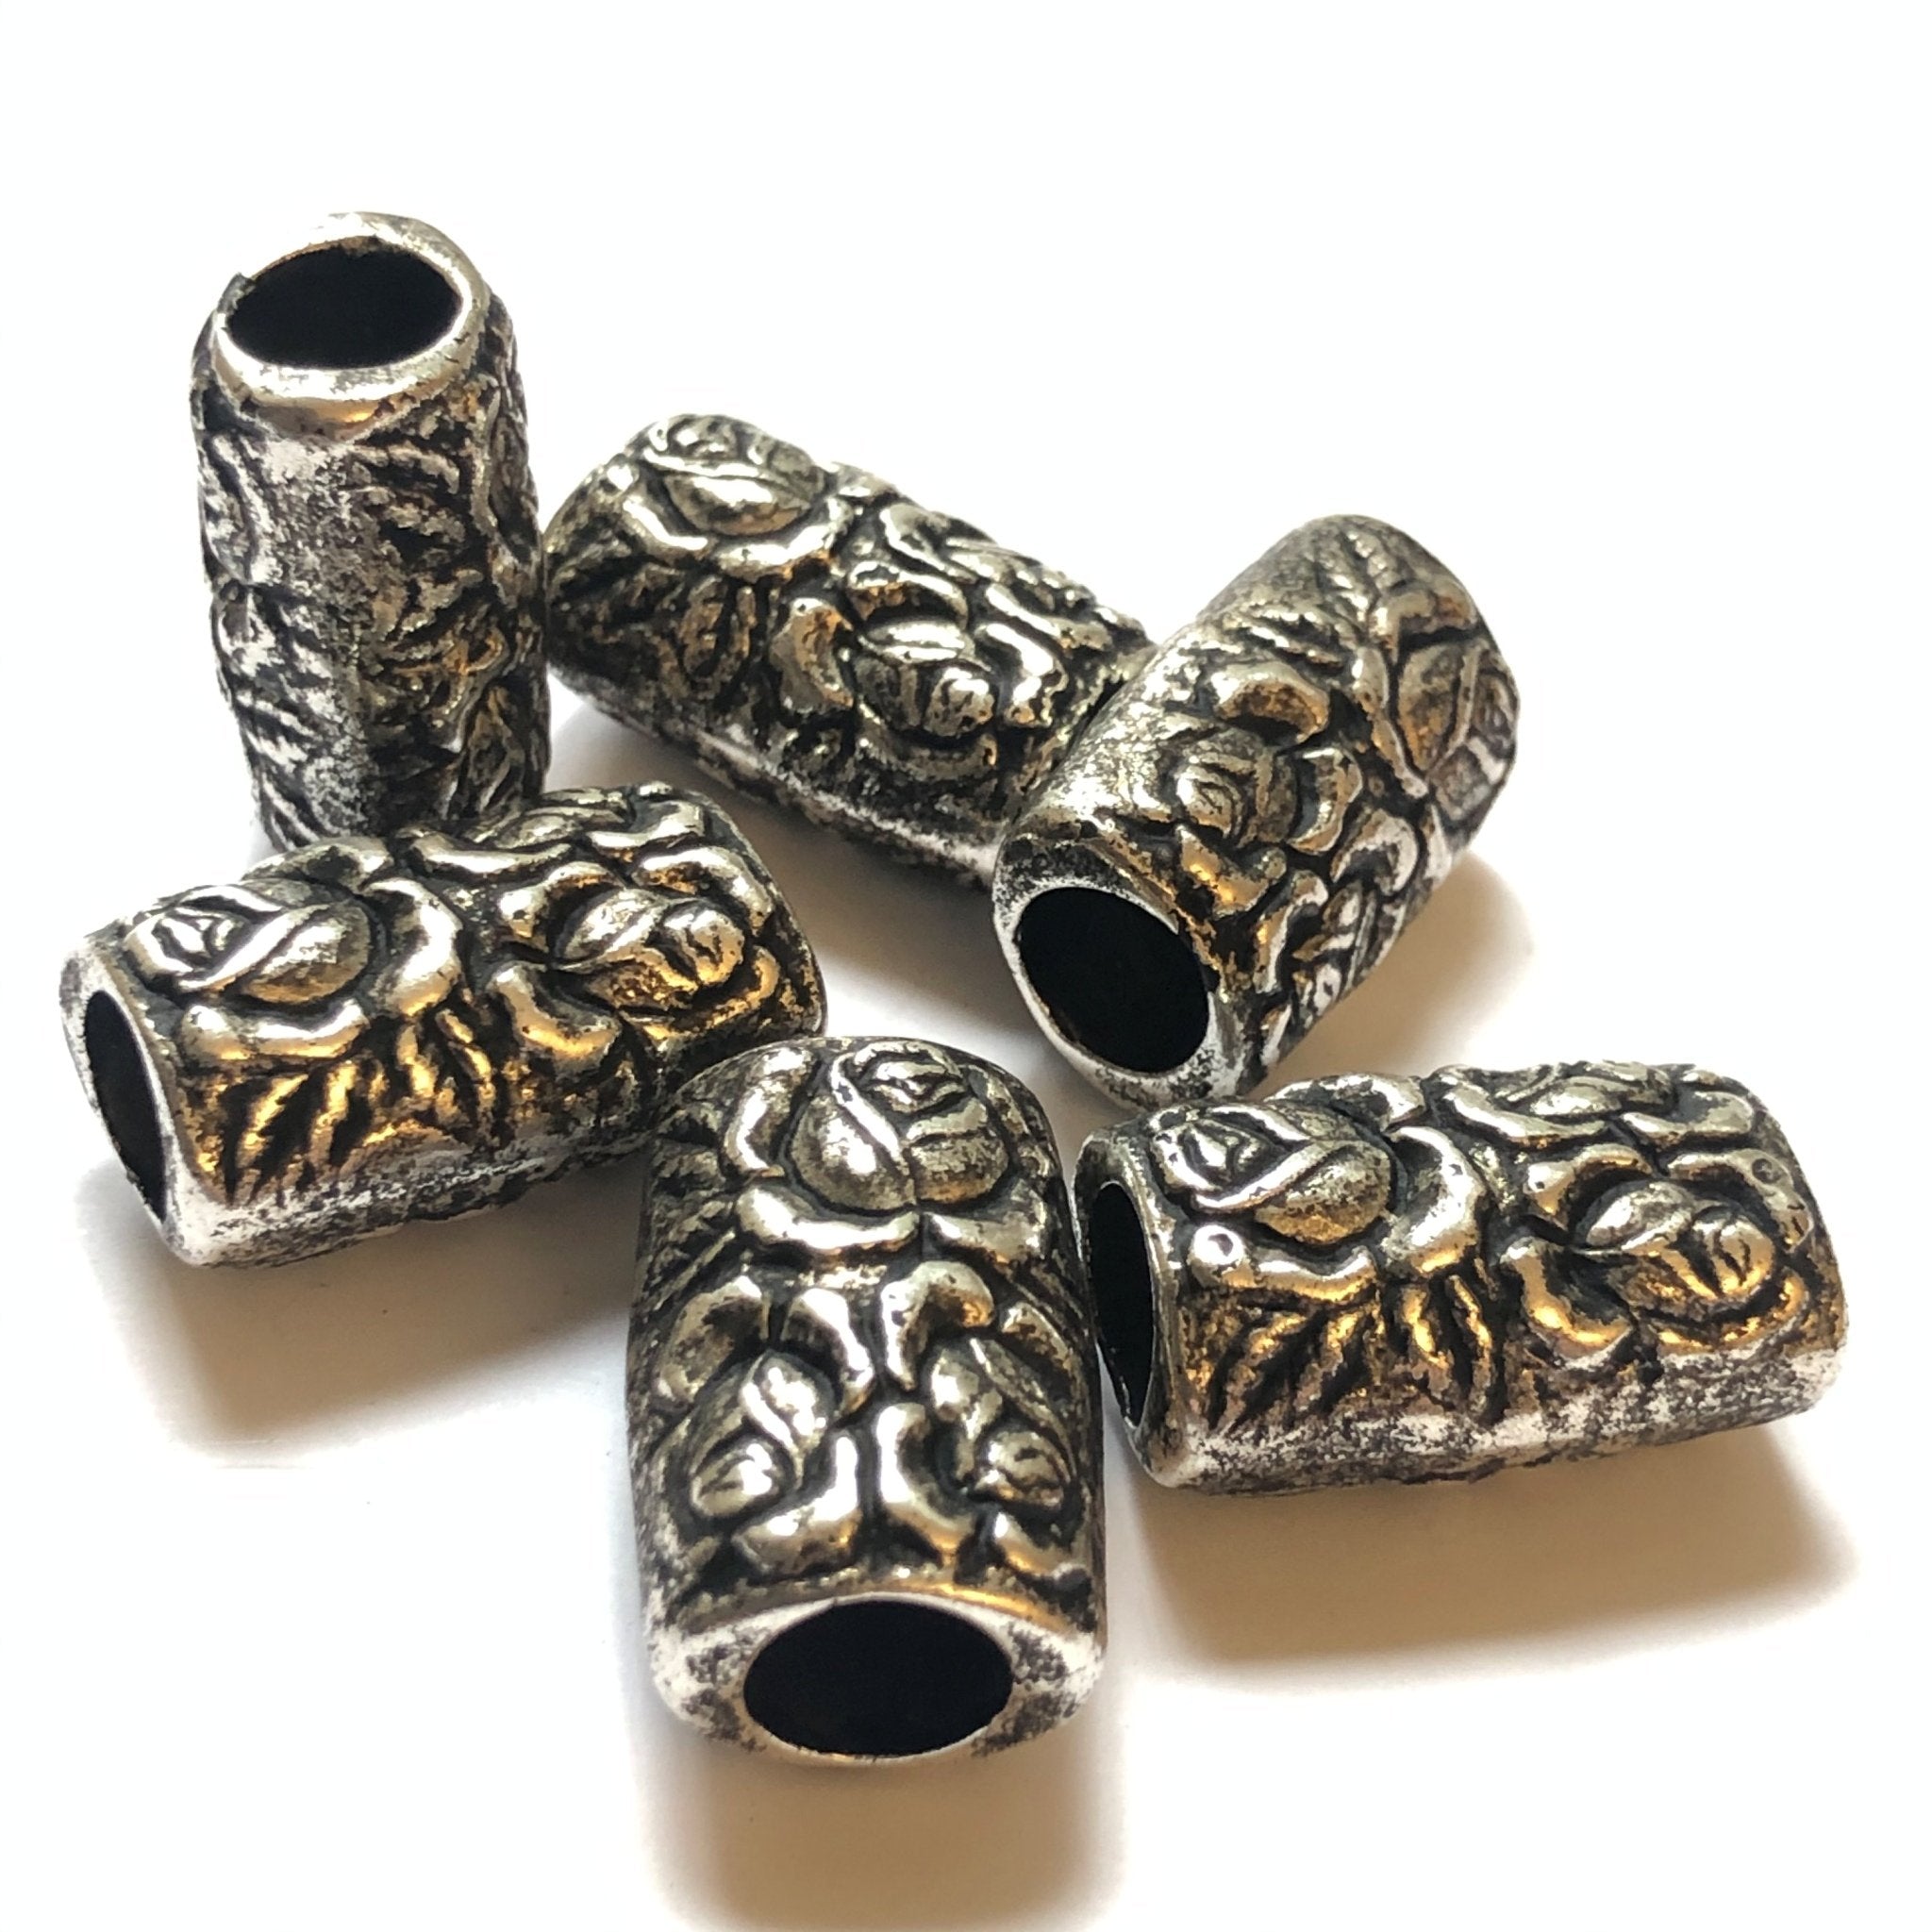 23X15MM Antique Silver Rose Tube Bead (12 pieces)